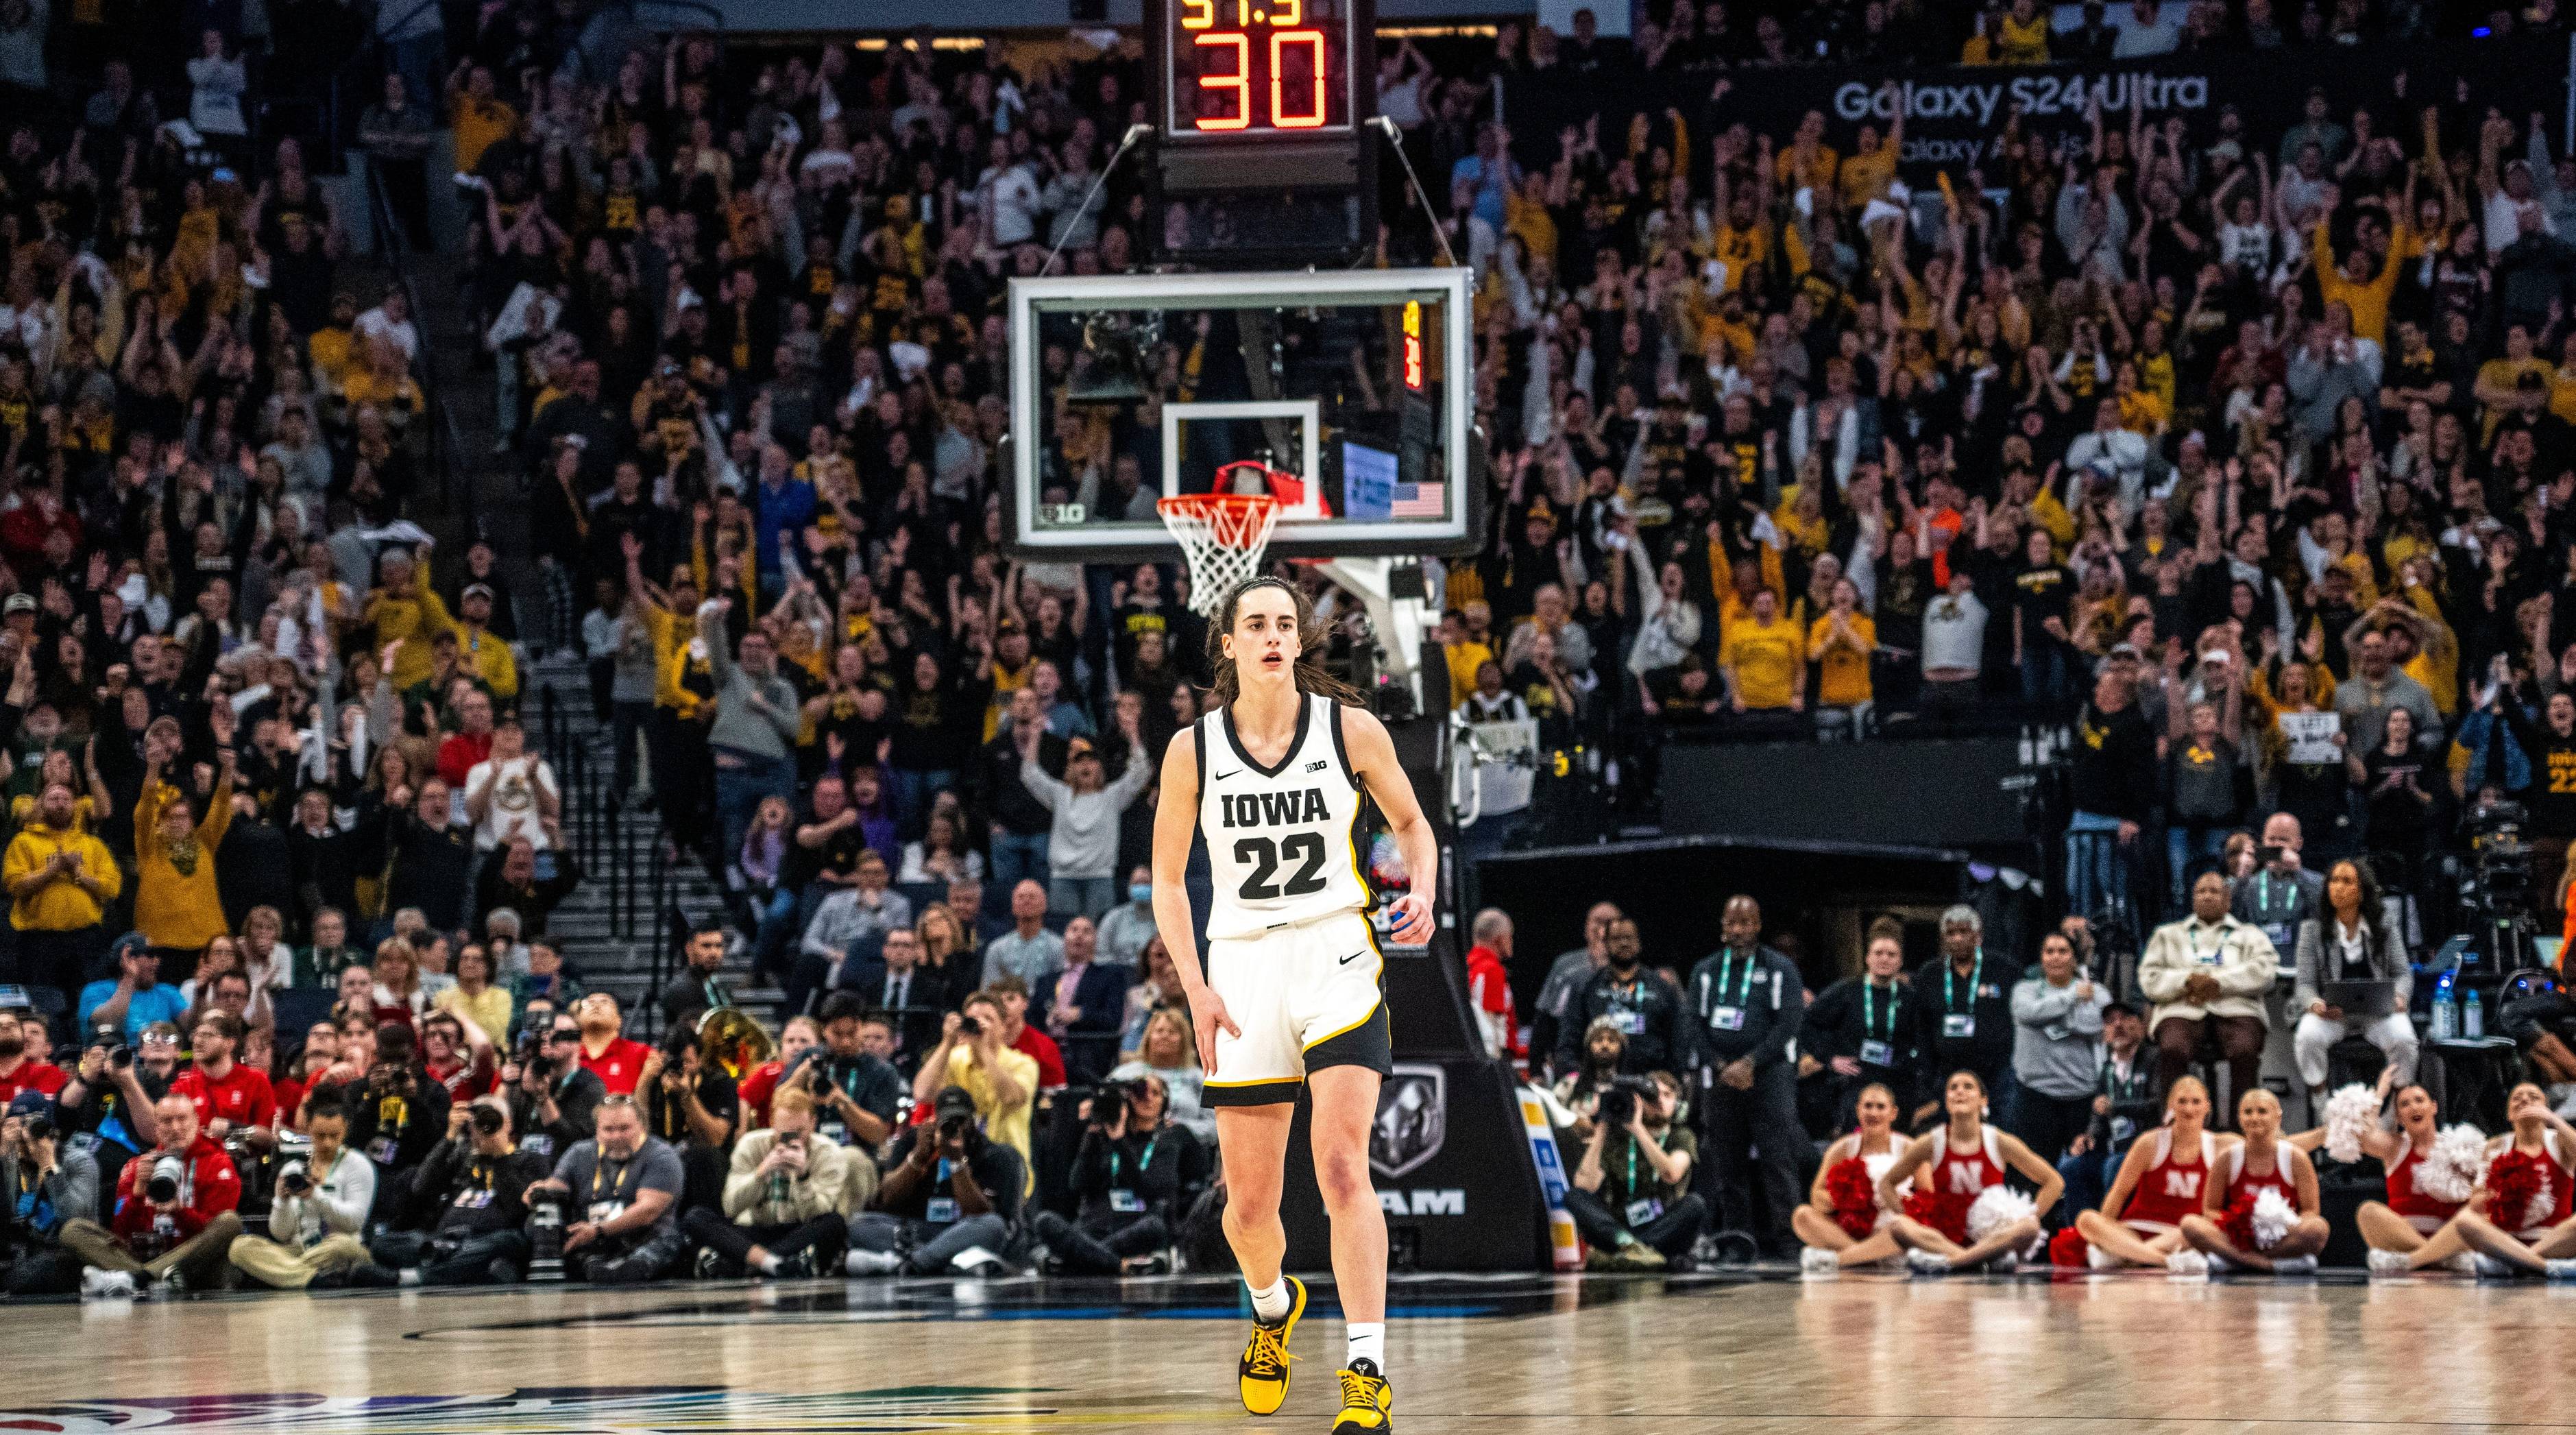 Caitlin Clark looks on from midcourt in front of a crowd during a game.